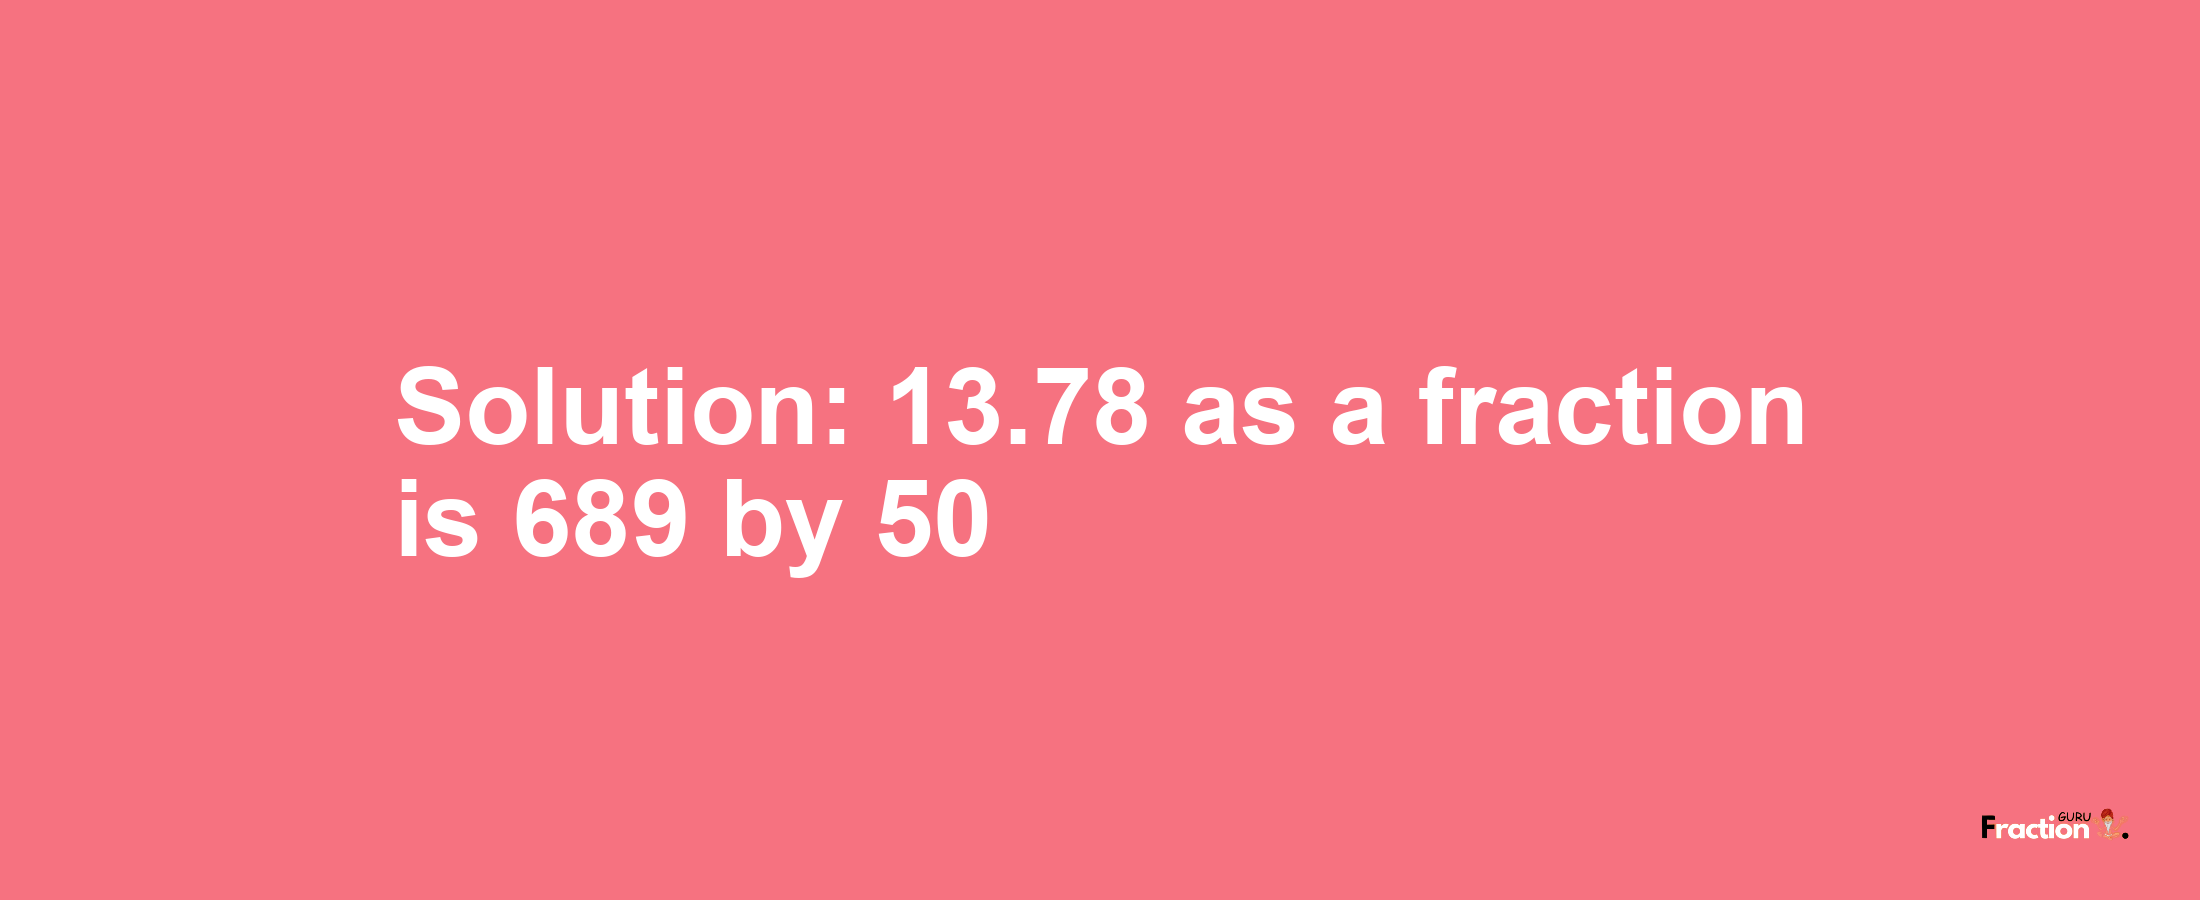 Solution:13.78 as a fraction is 689/50